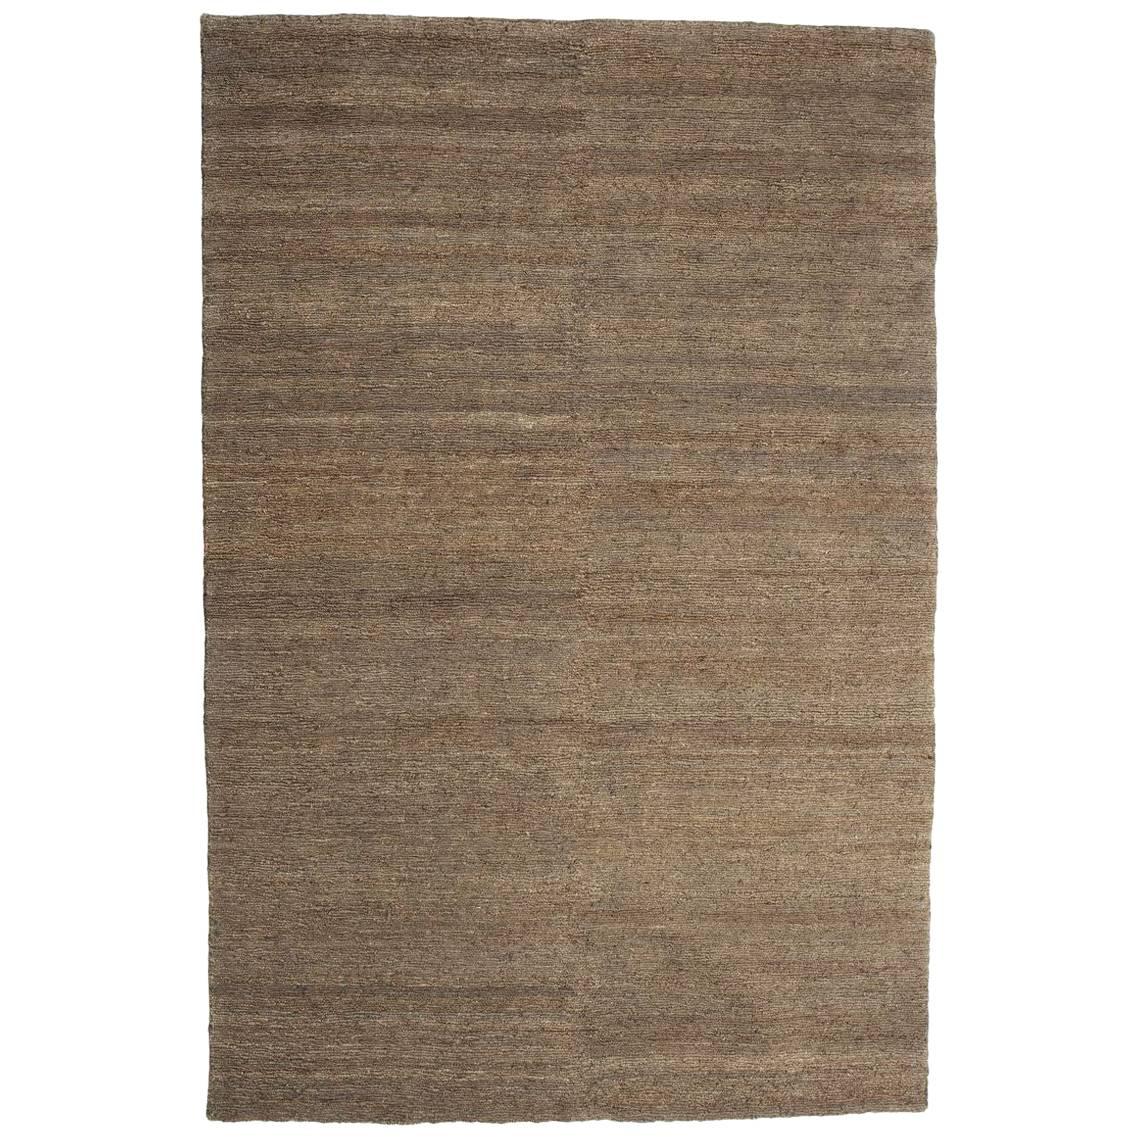 Khaki Earth Rug in Hand-Knotted Jute by Nani Marquina & Ariadna Miquel, Small